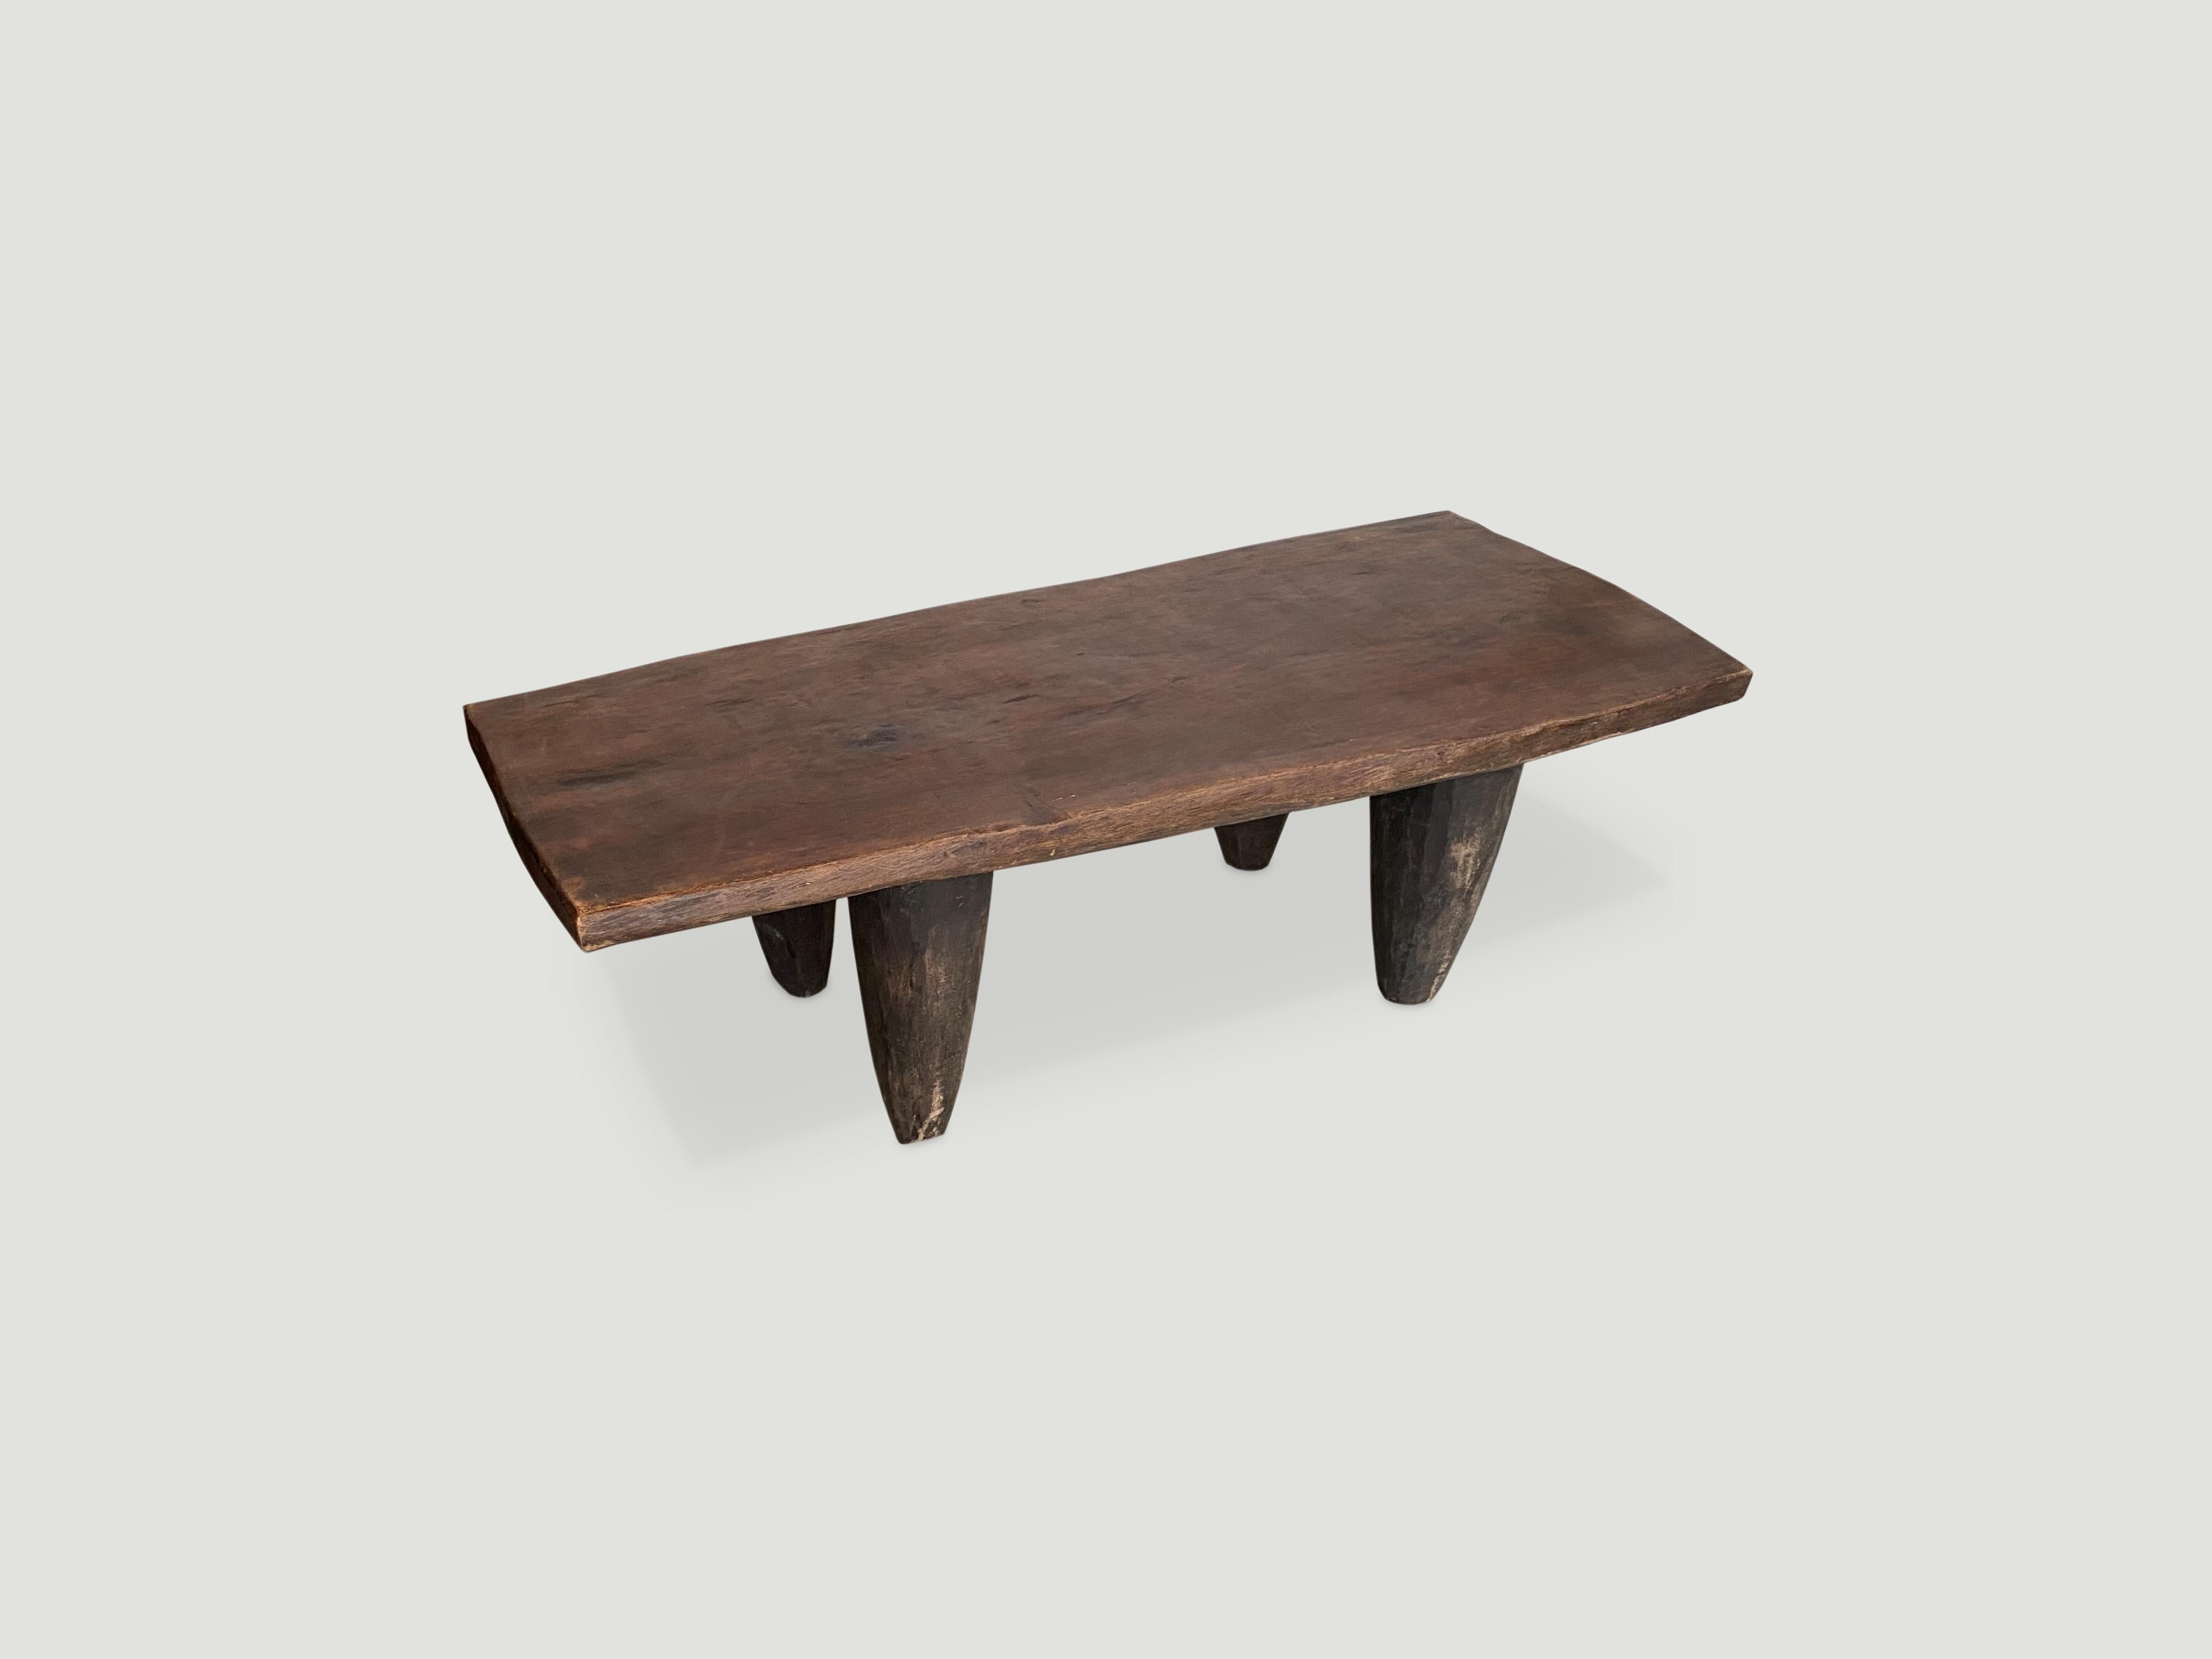 Antique bench or coffee table carved from a single piece of iroko wood, native to the west coast of Africa. The wood is tough, dense and very durable. Shown with cone style legs.

This bench or coffee table was sourced in the spirit of wabi-sabi,